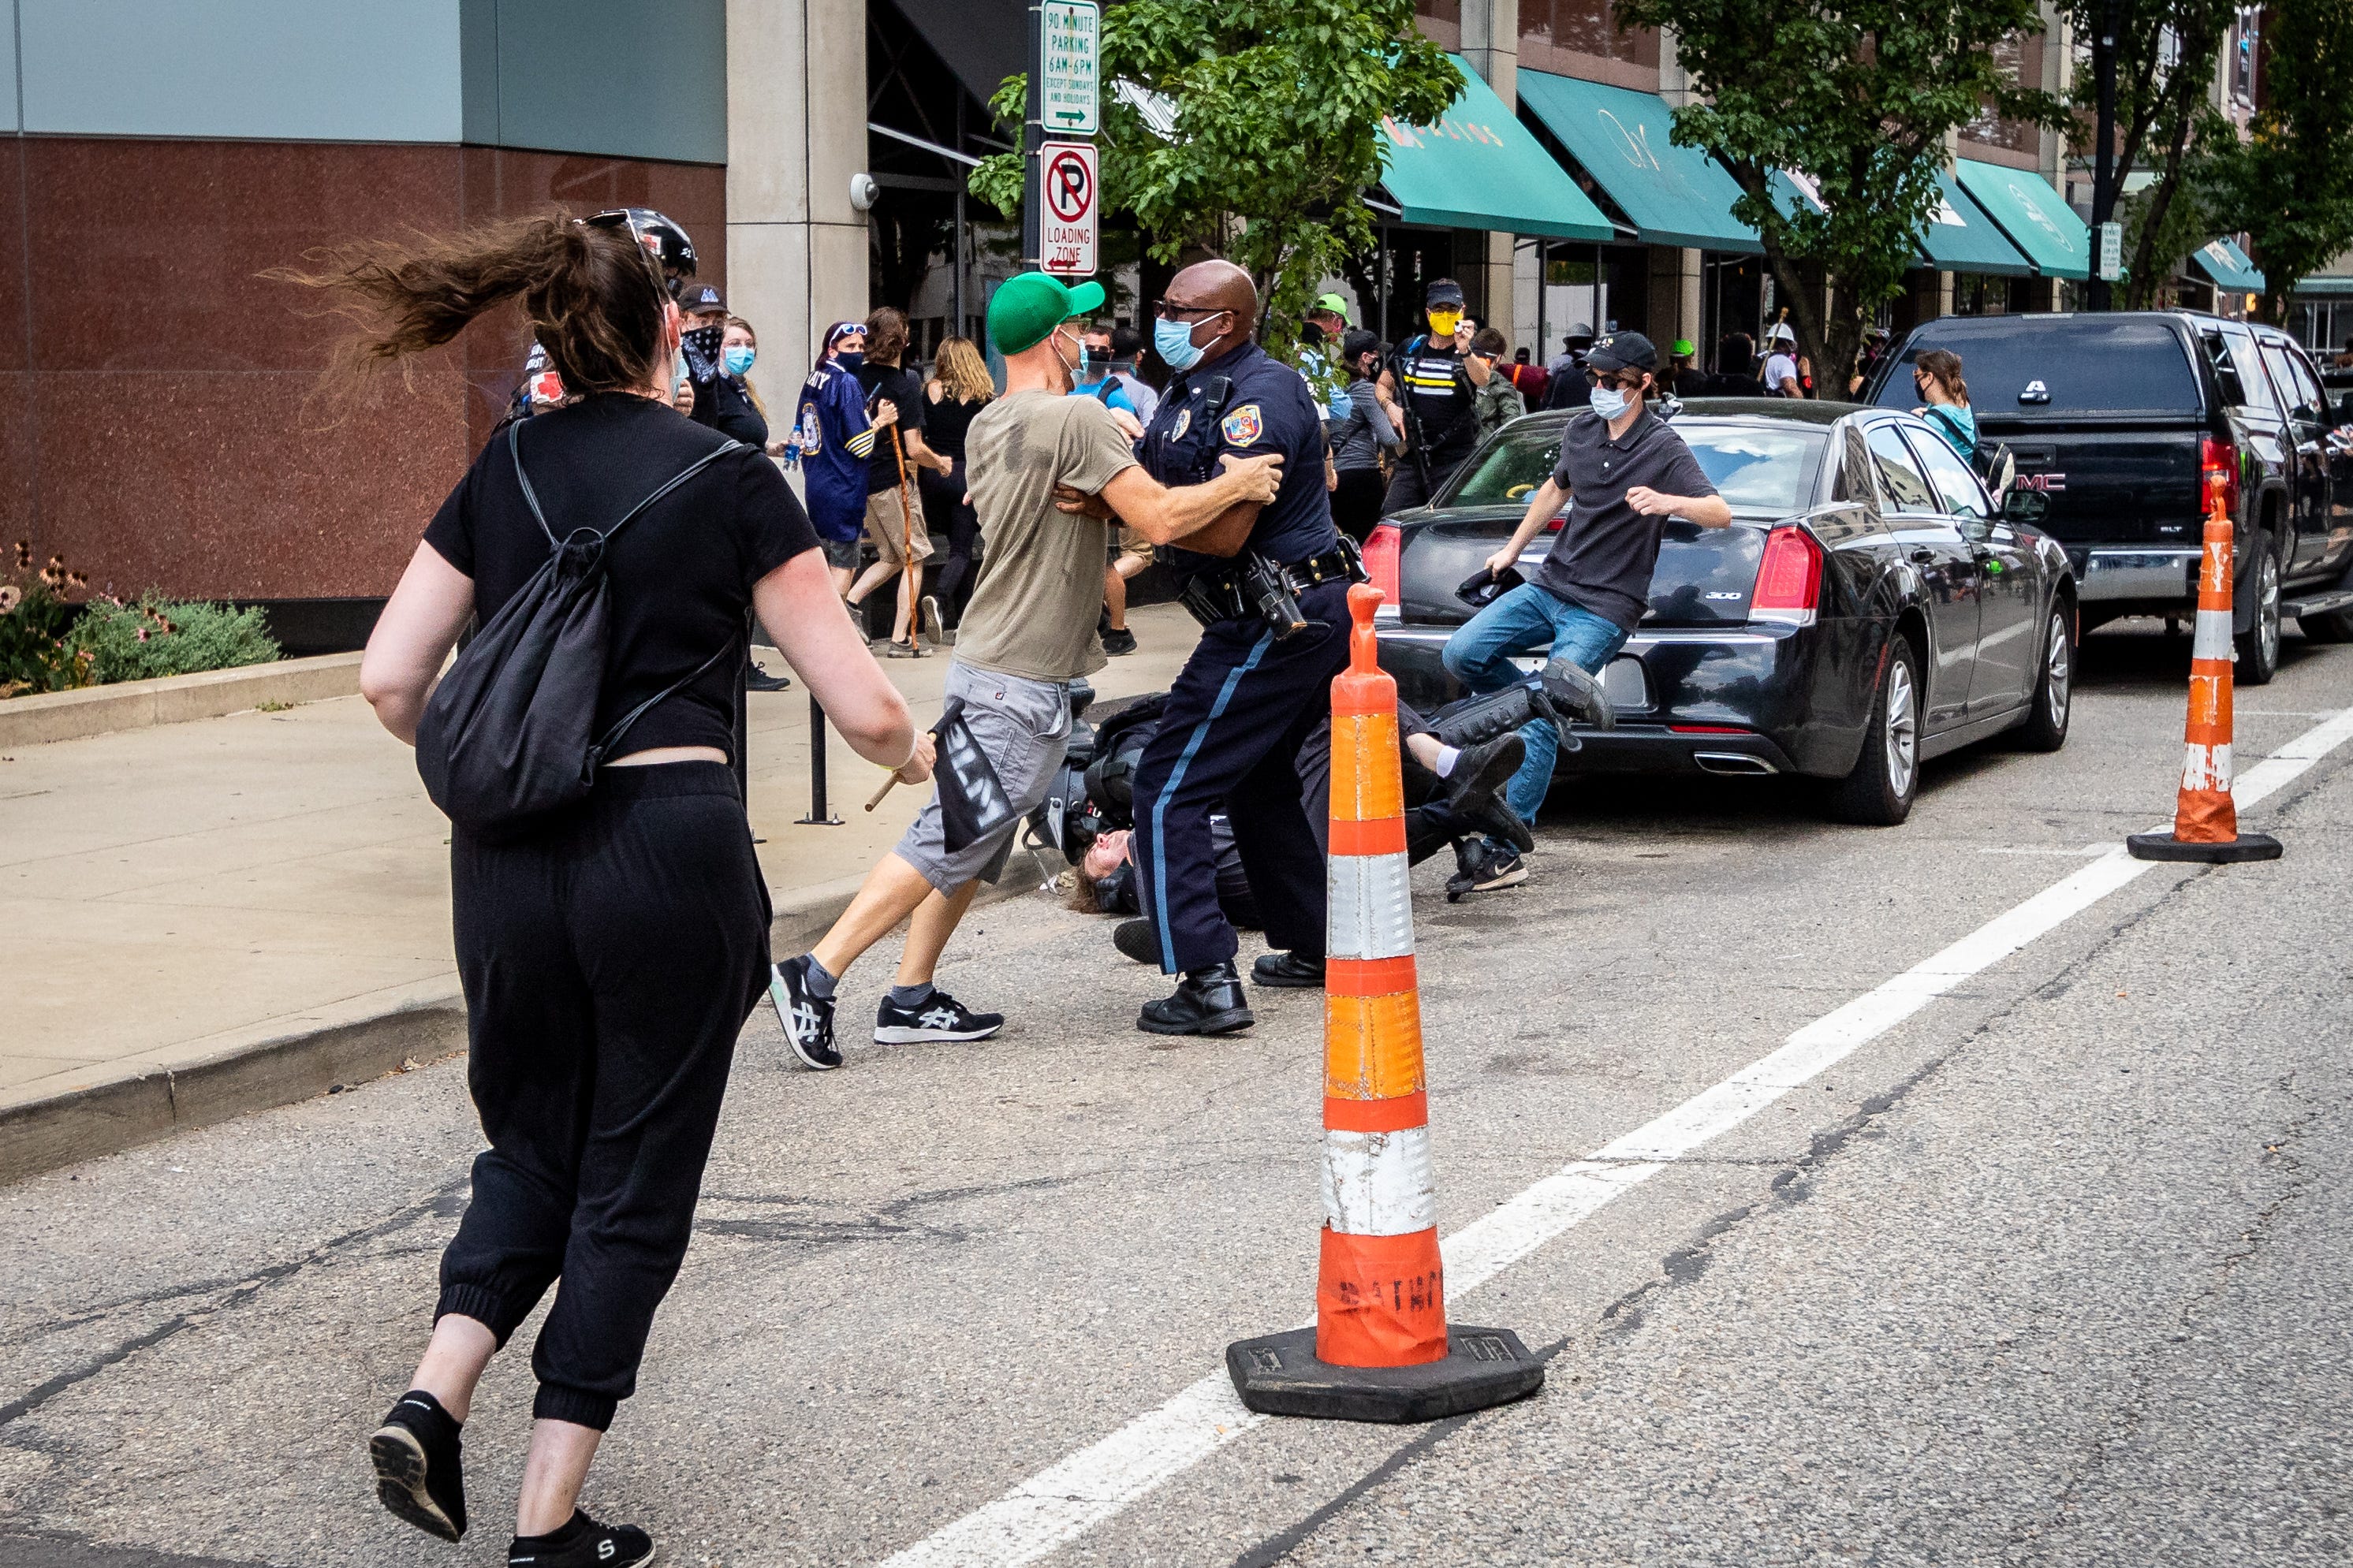 Kalamazoo Assistant Chief of Police, Vernon Coakley, holds back a counter-protestor while another officer makes an arrest. Members of Proud Boys, antifa, and a local church clash with each other and local and Michigan State Police at Arcadia Creek Festival Plaza in Kalamazoo on August 15, 2020.